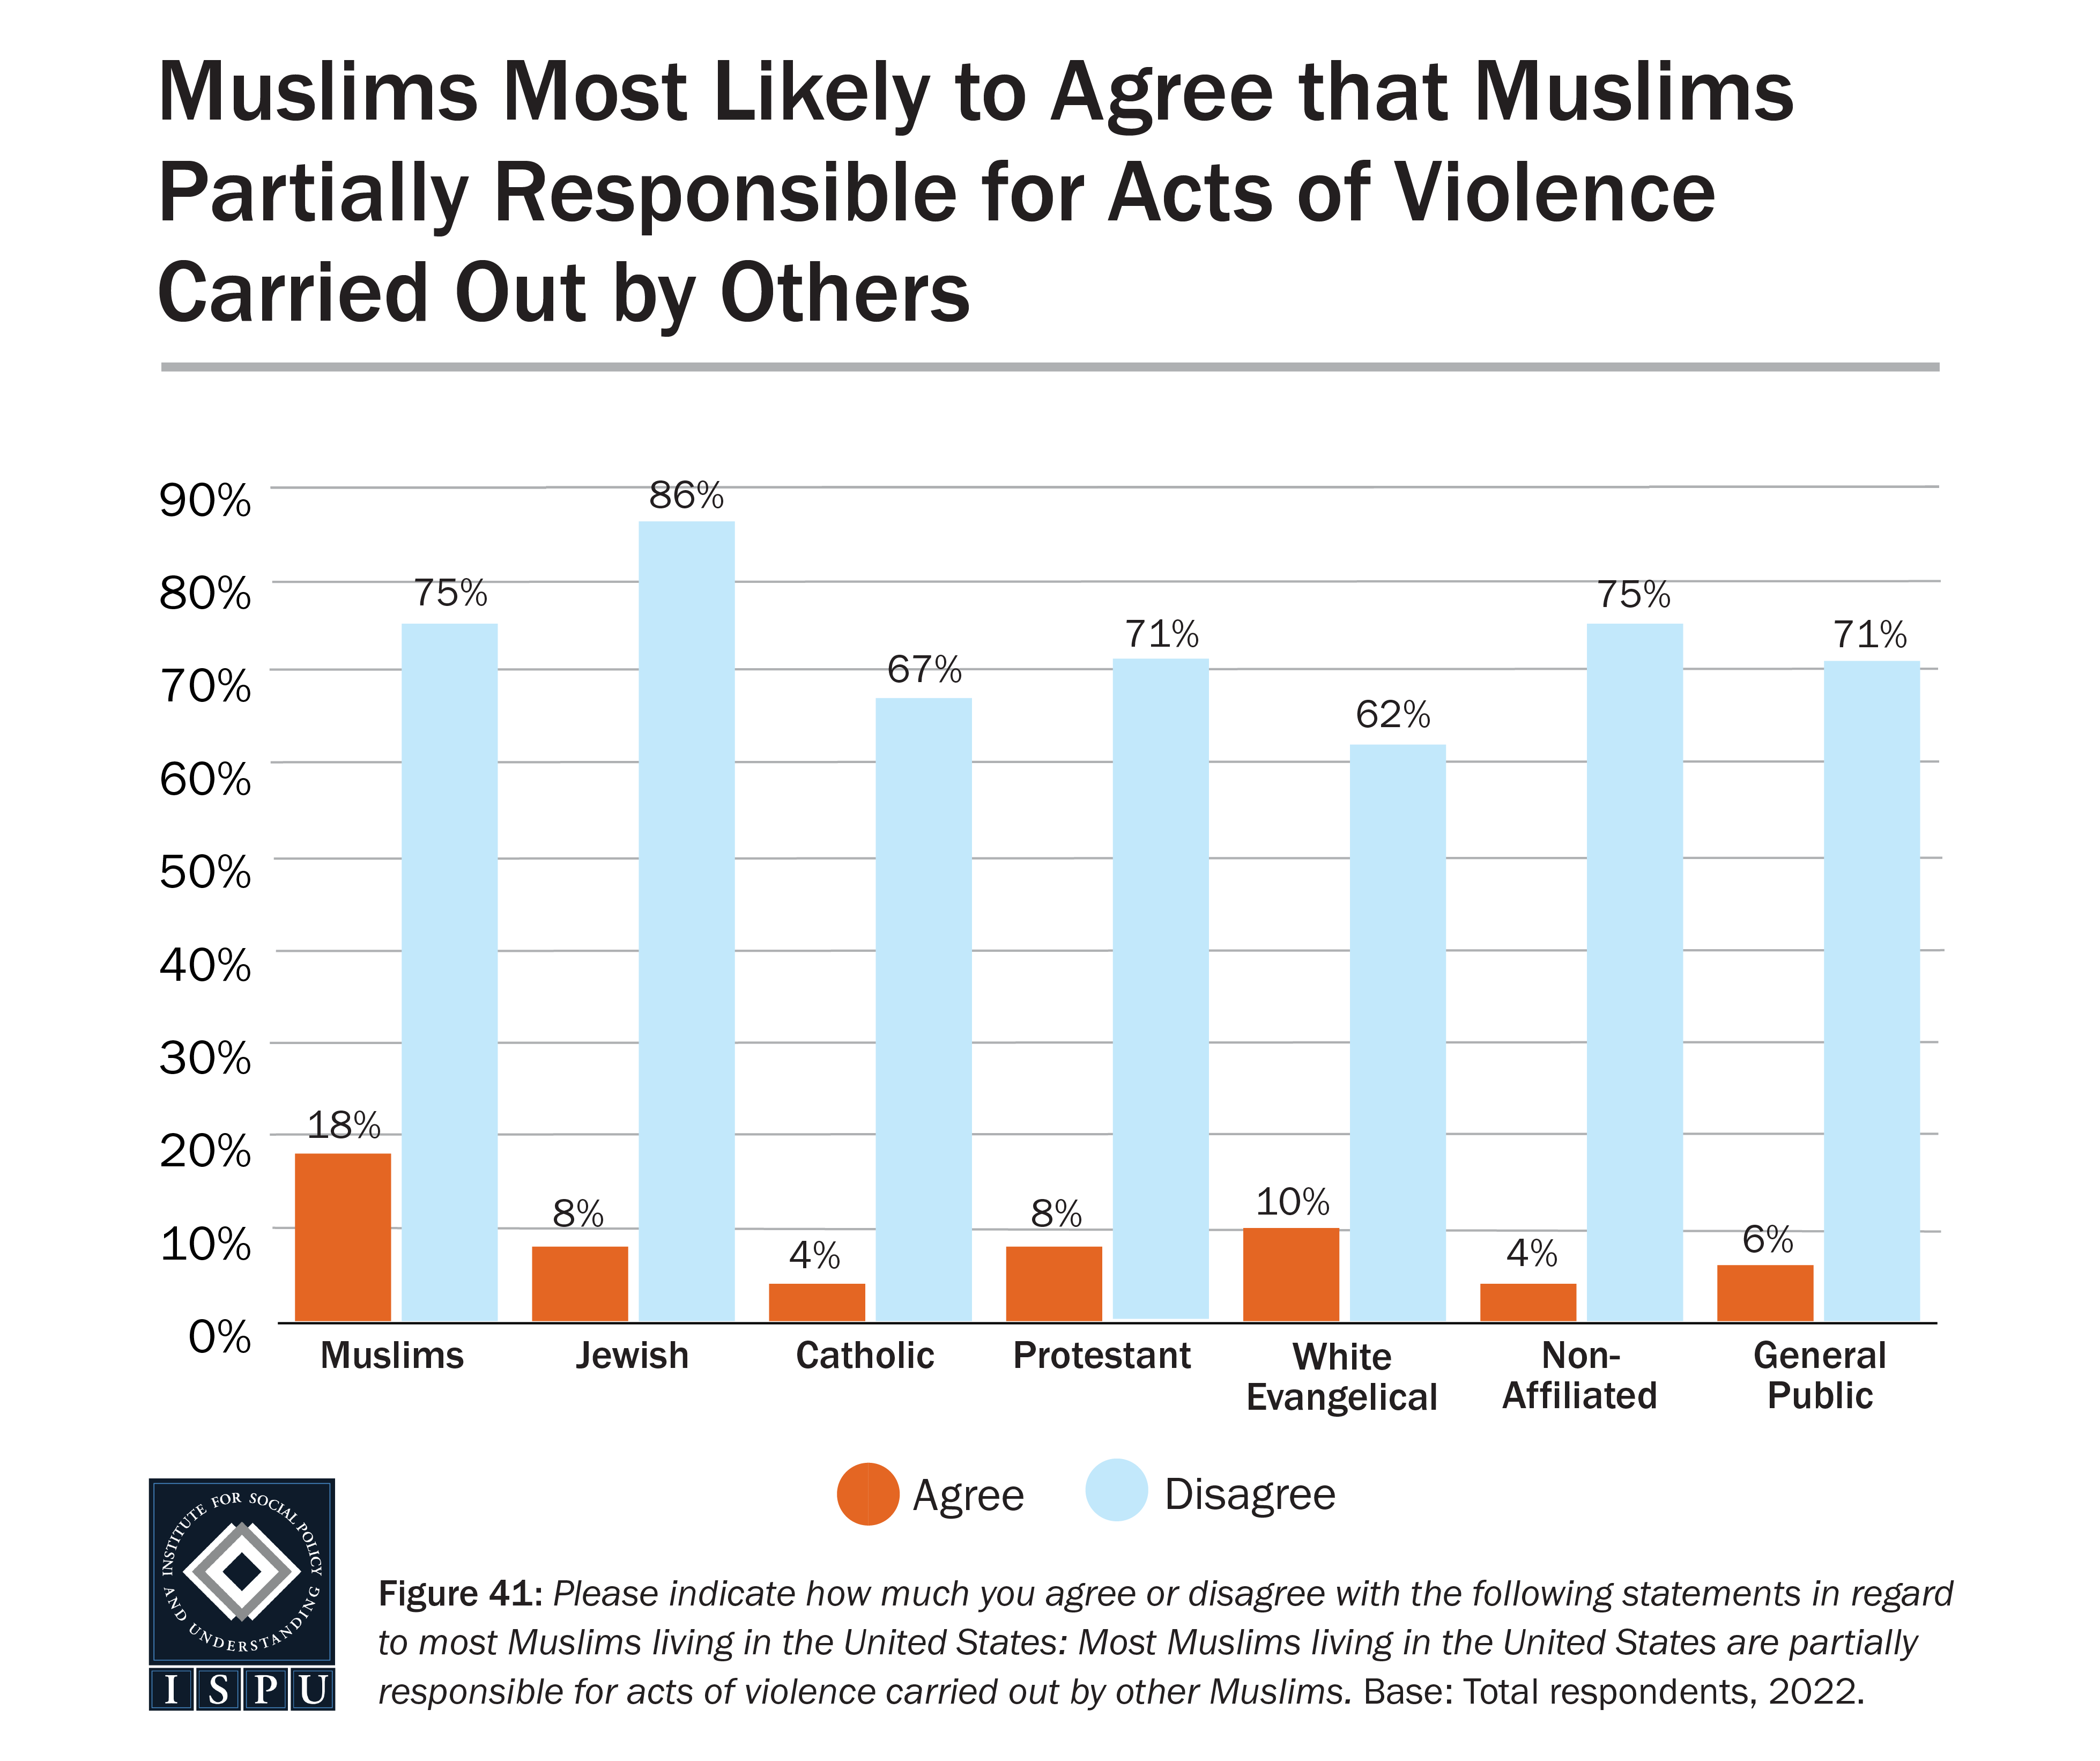 A bar graph showing the proportion of all groups surveyed who agree or disagree with the false notion that most Muslims living in the US are partially responsible for acts of violence carried out by others.